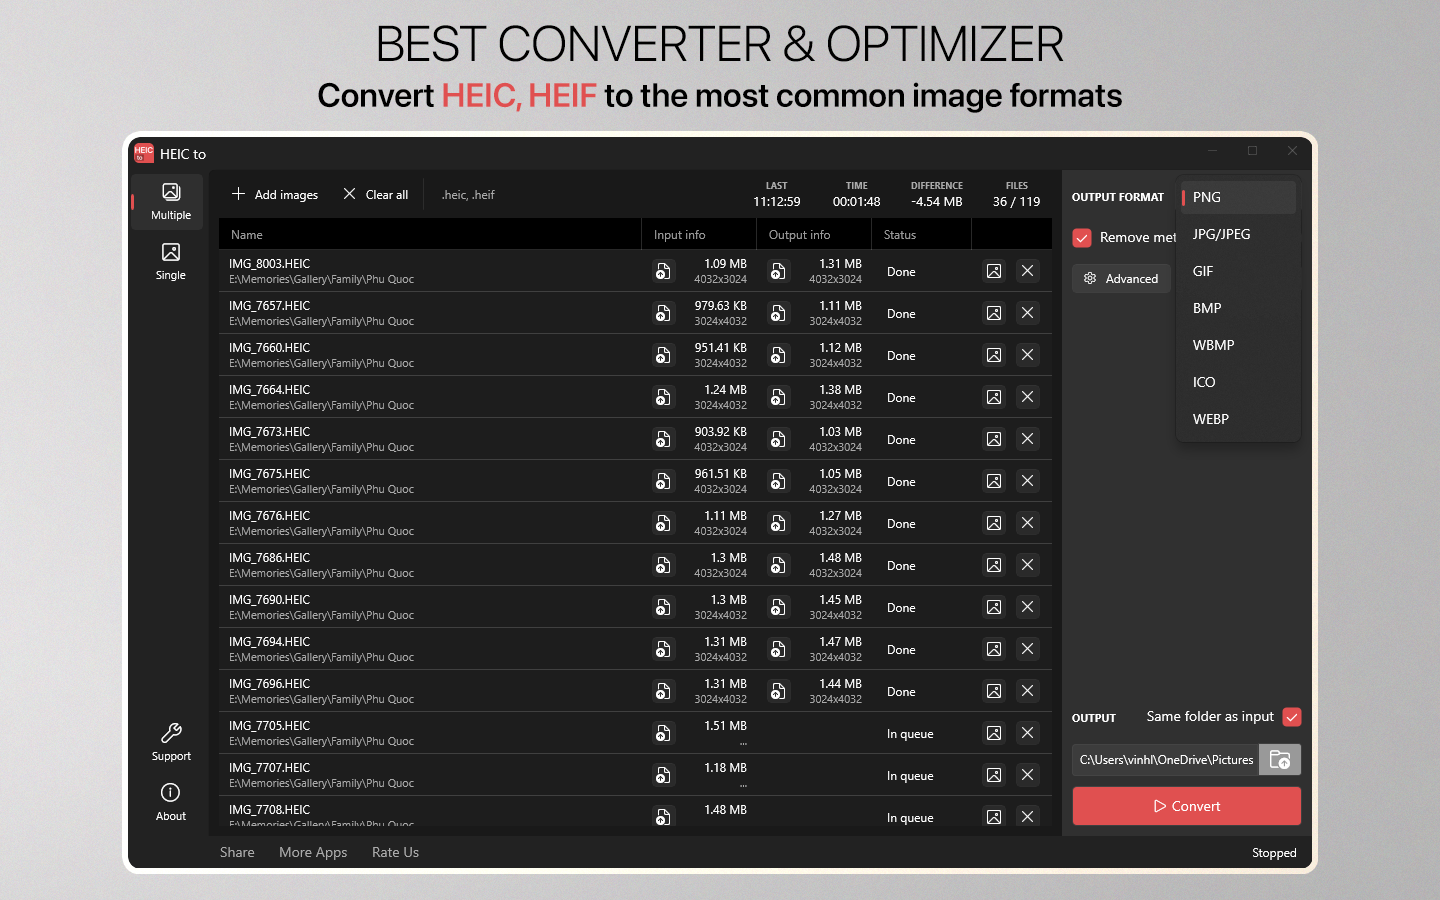 Best Converter & Optimizer - Convert HEIC, HEIF to the most common image formats.